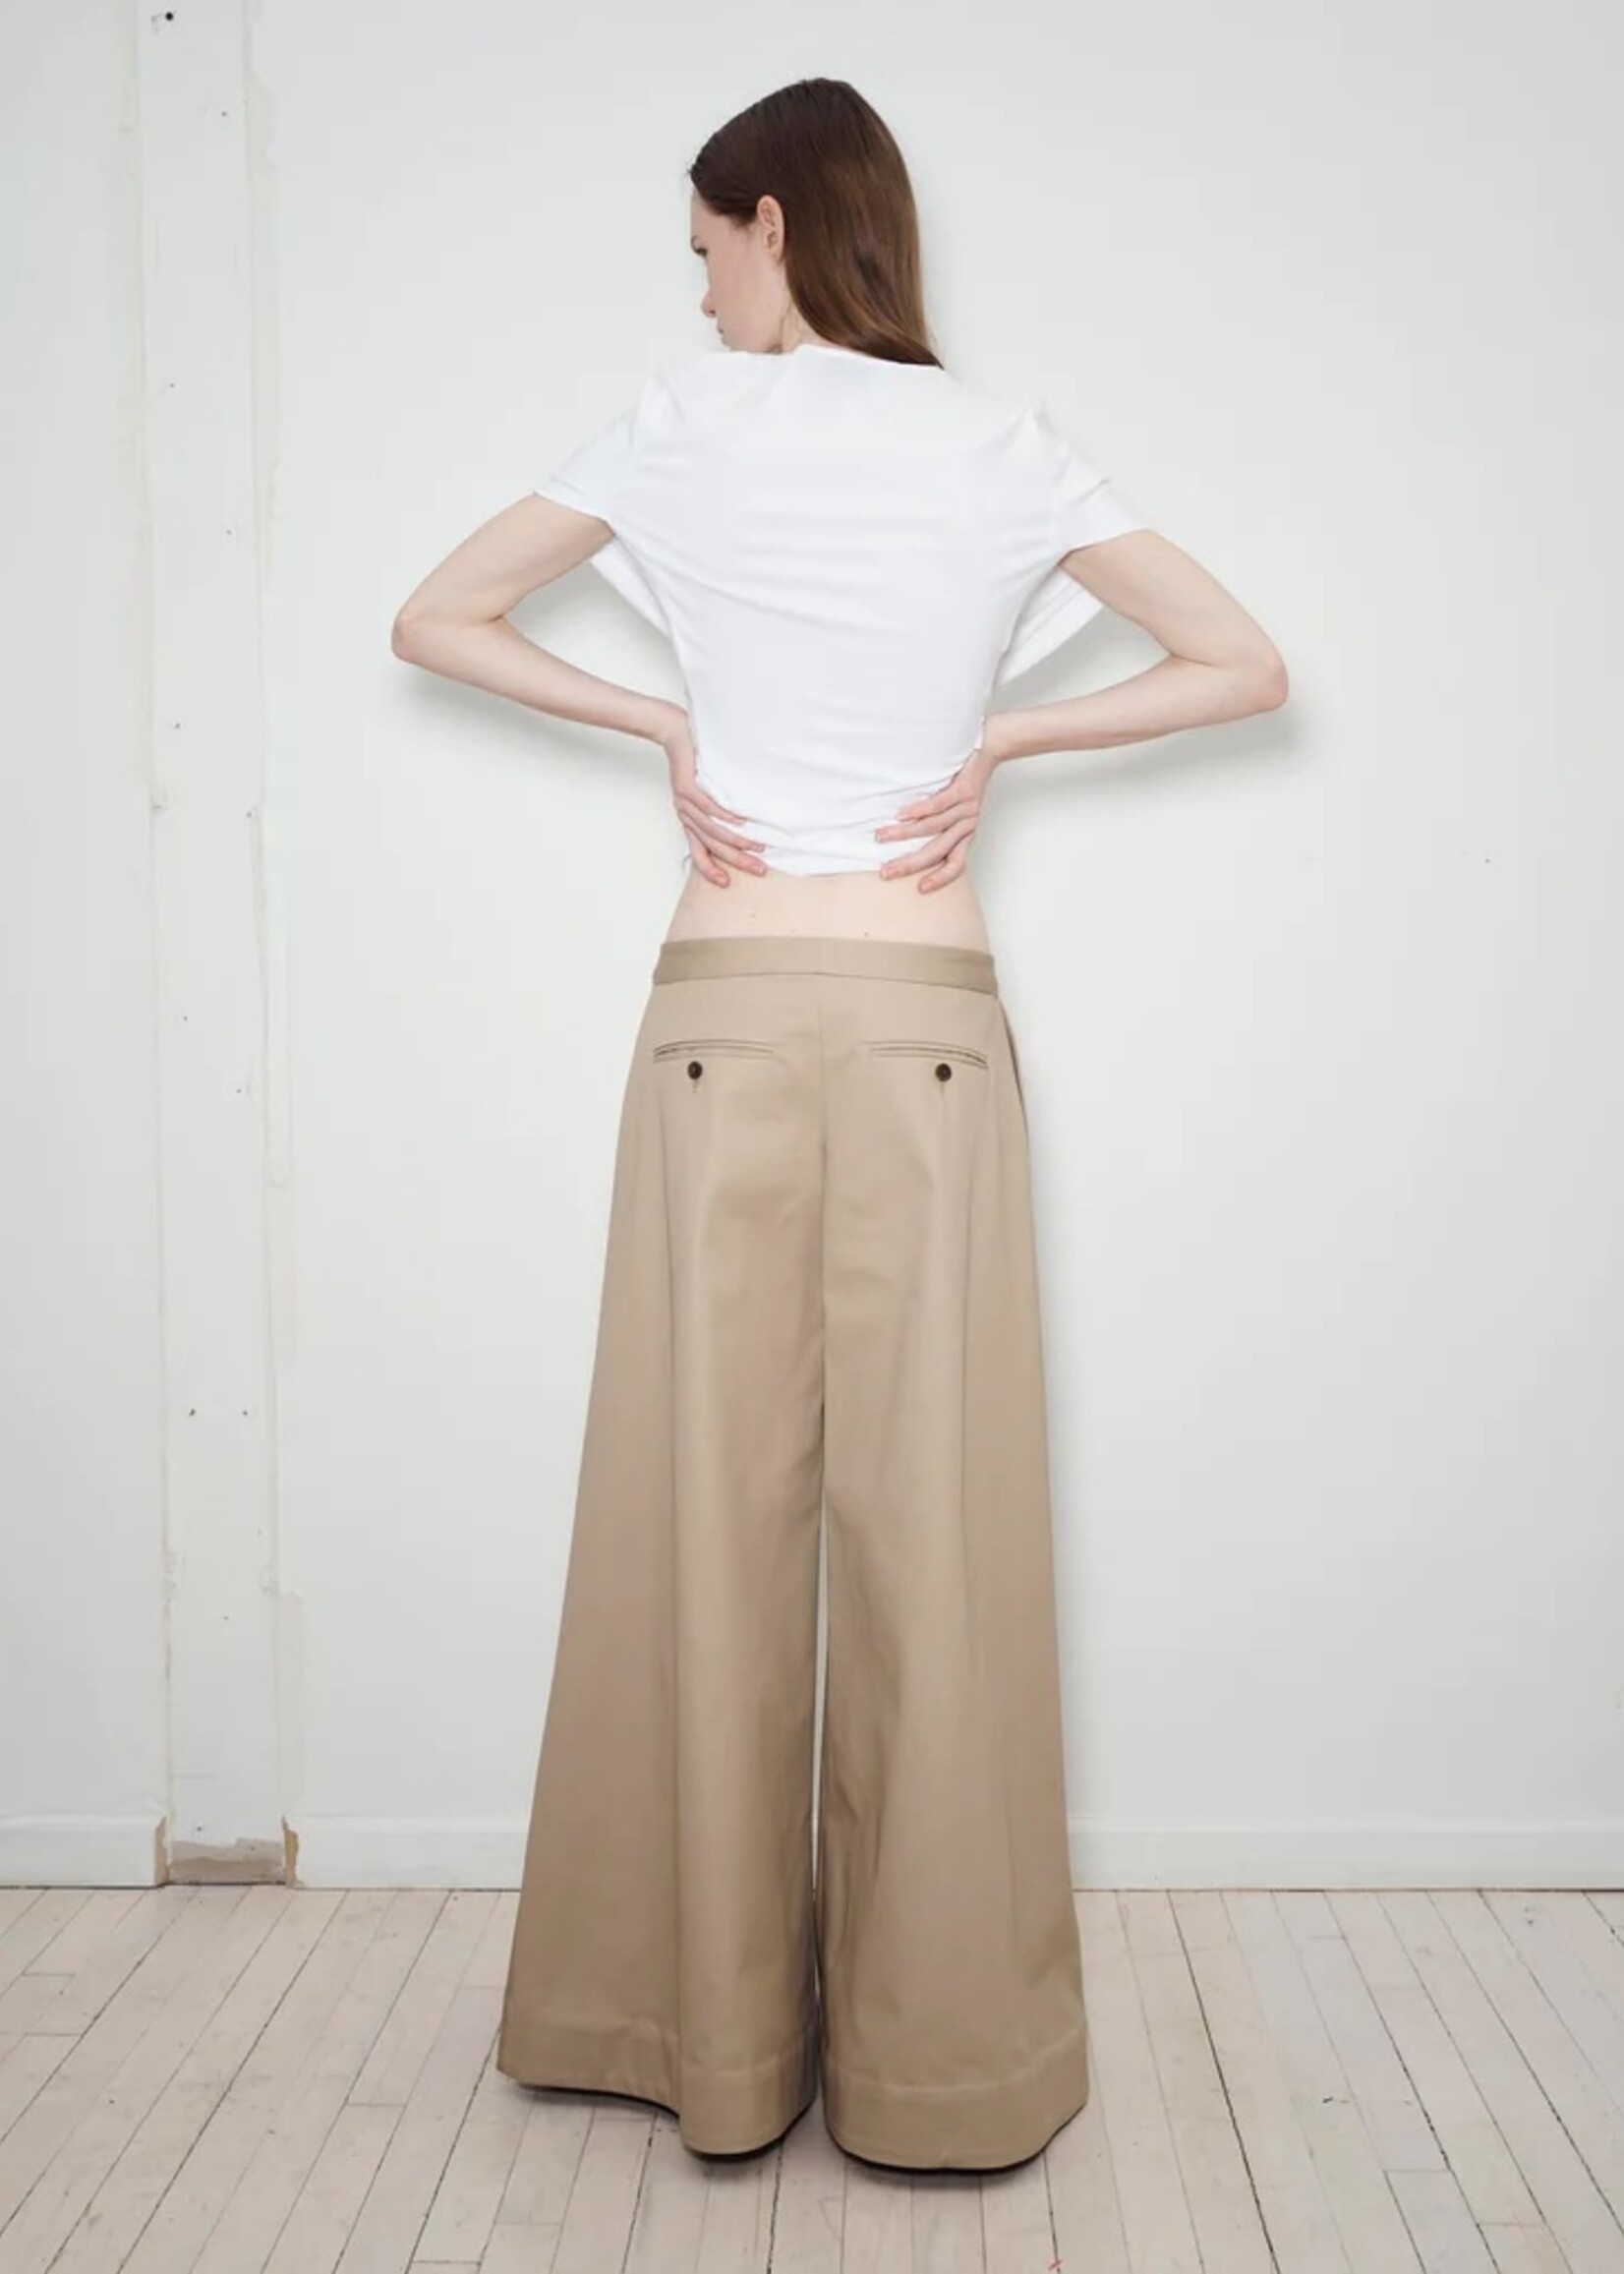 PUPPETS AND PUPPETS Rave Trouser in Tan